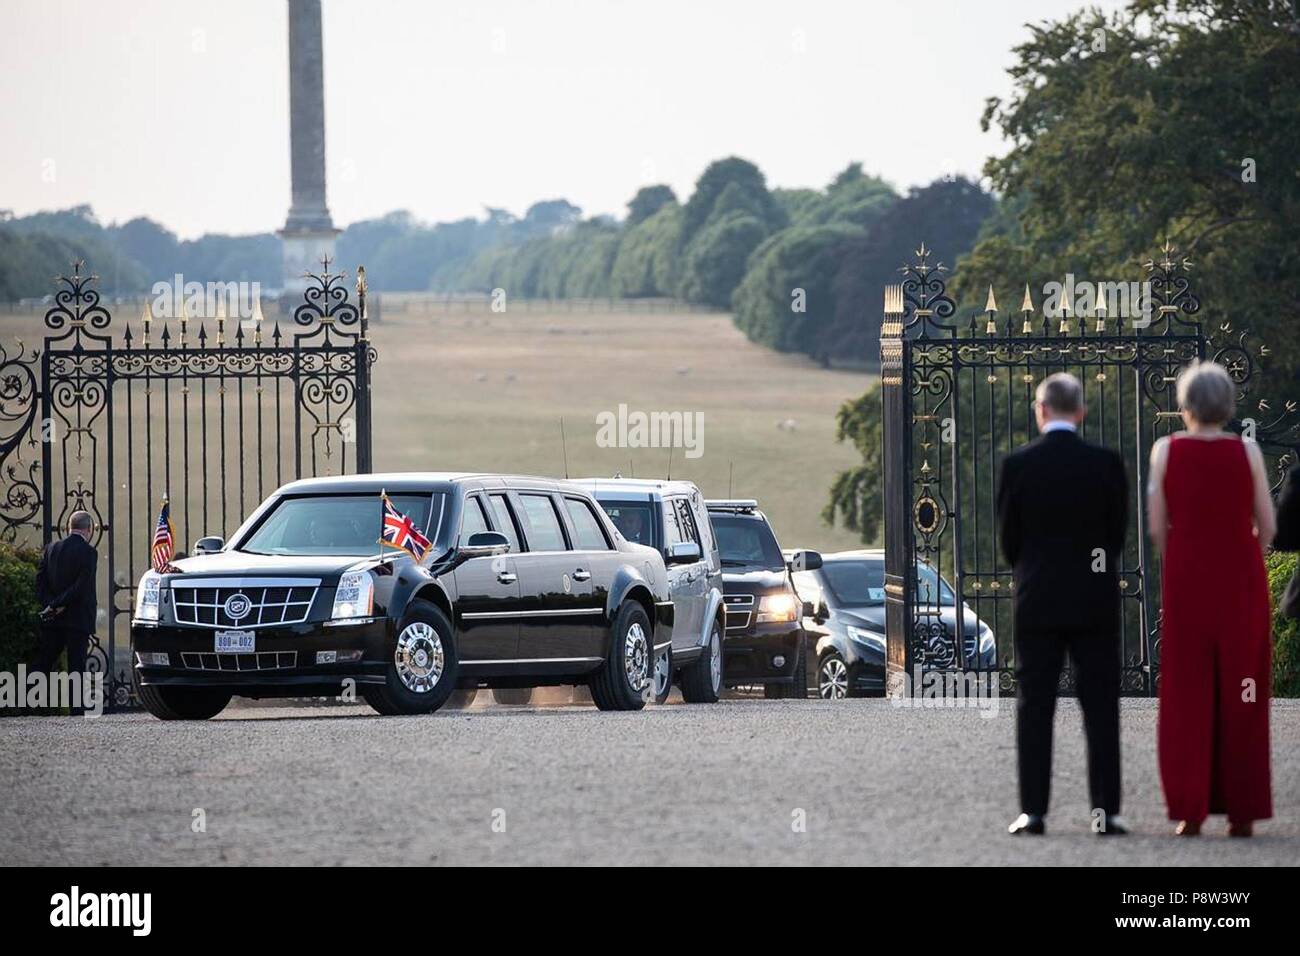 London, UK, 13 July 2018. British Prime Minister Theresa May and Philip May wait for the arrival of U.S President Donald Trump and First Lady Melania Trump for the formal dinner at Blenheim Palace July 12, 2018 in Oxfordshire, England. Credit: Planetpix/Alamy Live News Stock Photo